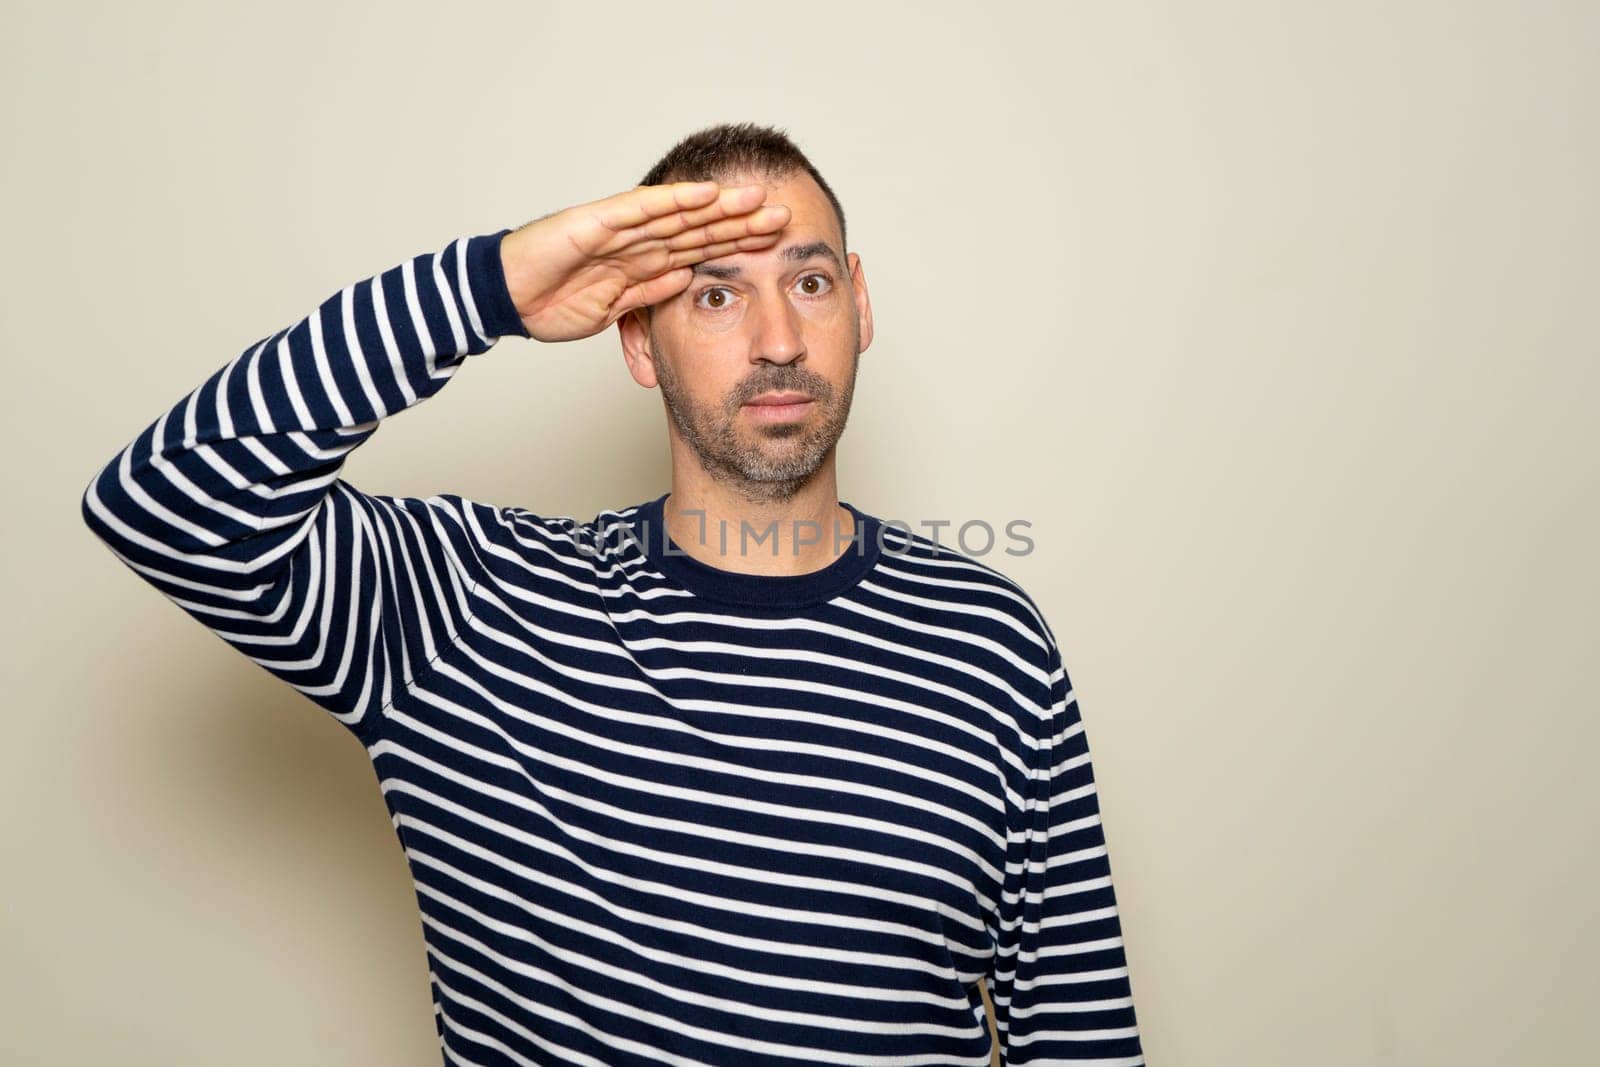 Hispanic man in his 40s saluting the camera with a military salute in an act of honor and patriotism, showing respect. Isolated on beige background. by Barriolo82